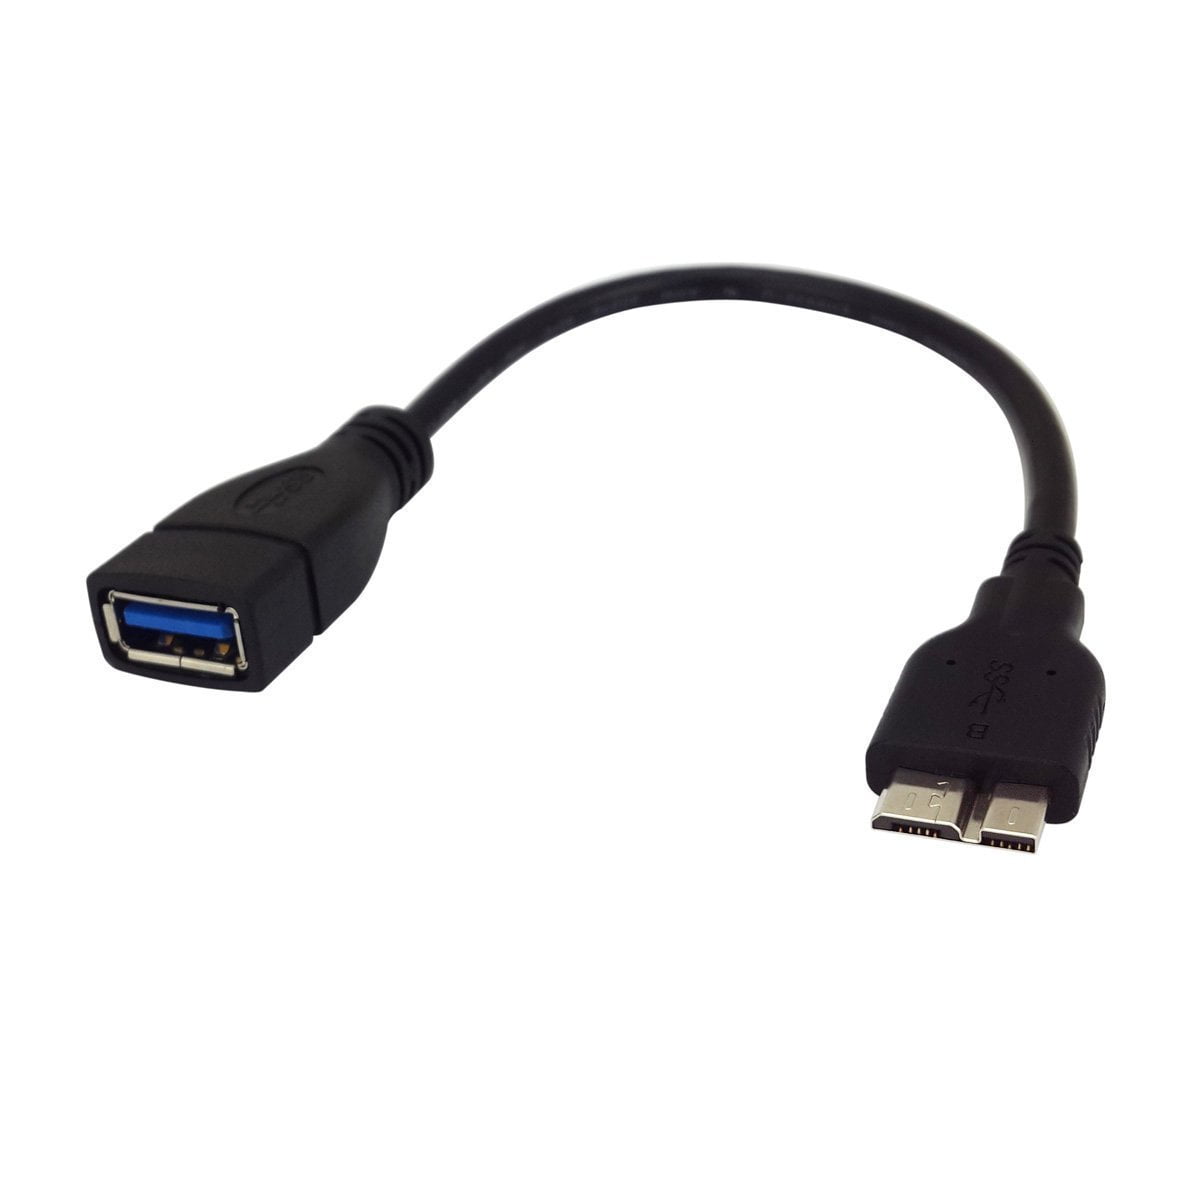 PRO OTG Cable Works for Samsung SM-G6000 Right Angle Cable Connects You to Any Compatible USB Device with MicroUSB Cable!